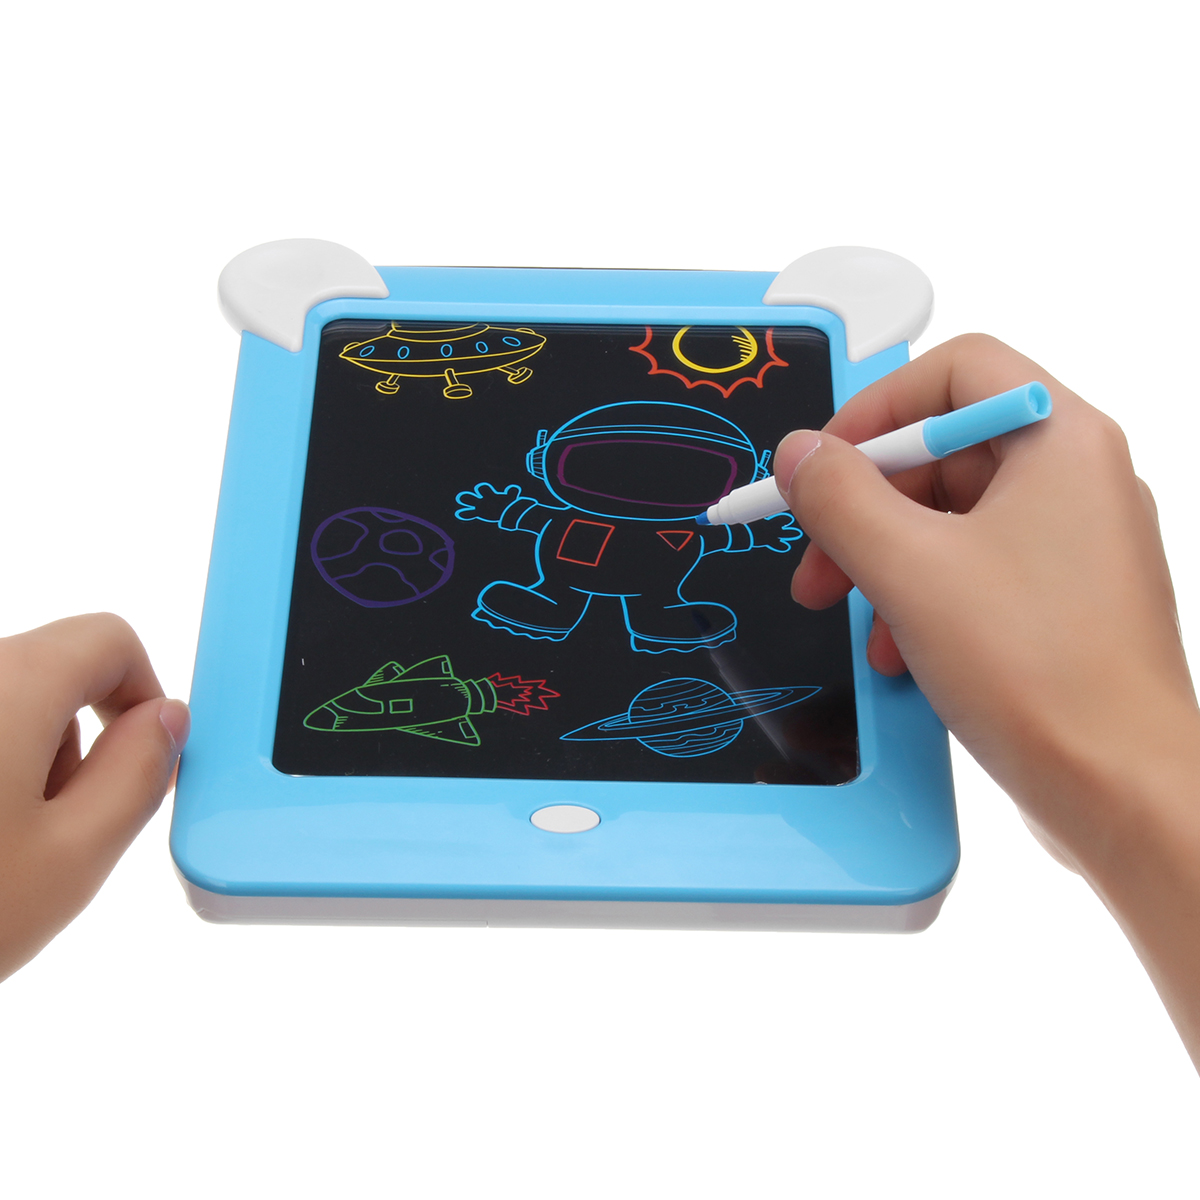 3D-Magic-Drawing-Pad-Childrens-Brain-Development-Puzzle-Board-With-Light-1530929-9